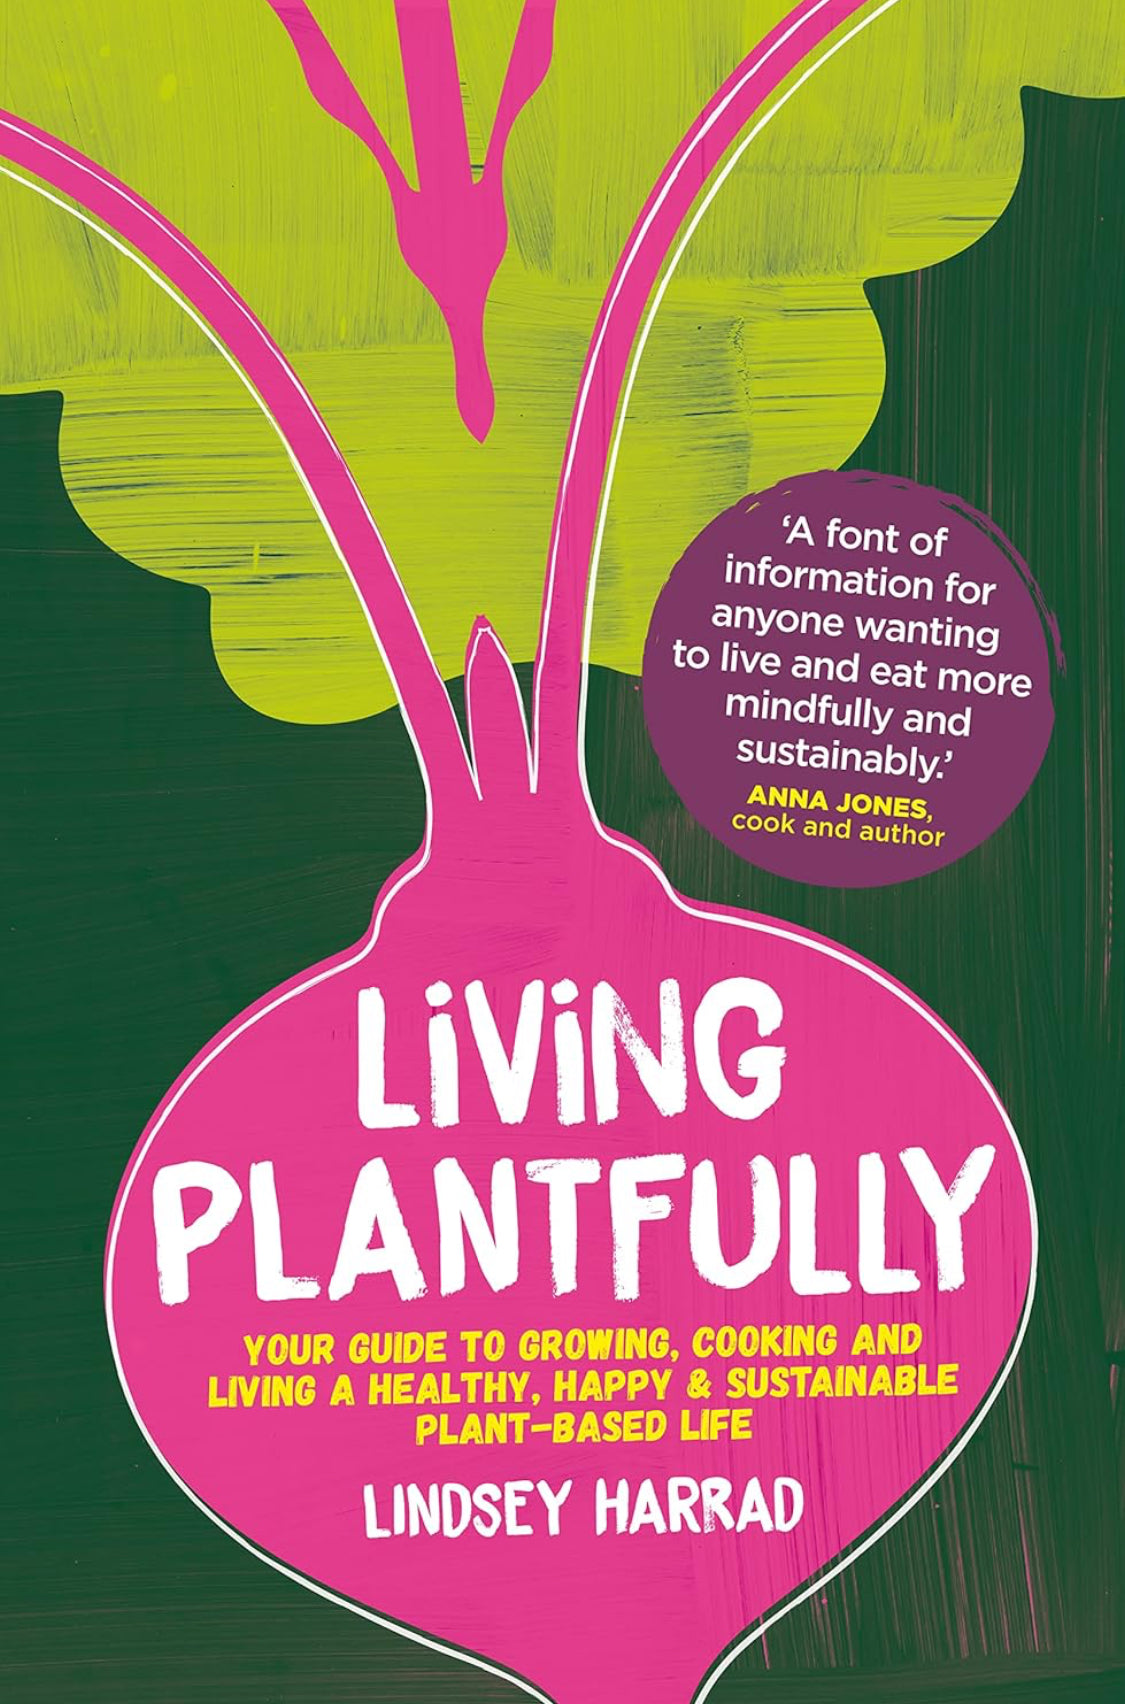 Living Plantfully: Your Guide to Growing, Cooking and Living a Healthy, Happy and Sustainable Plant Based Life